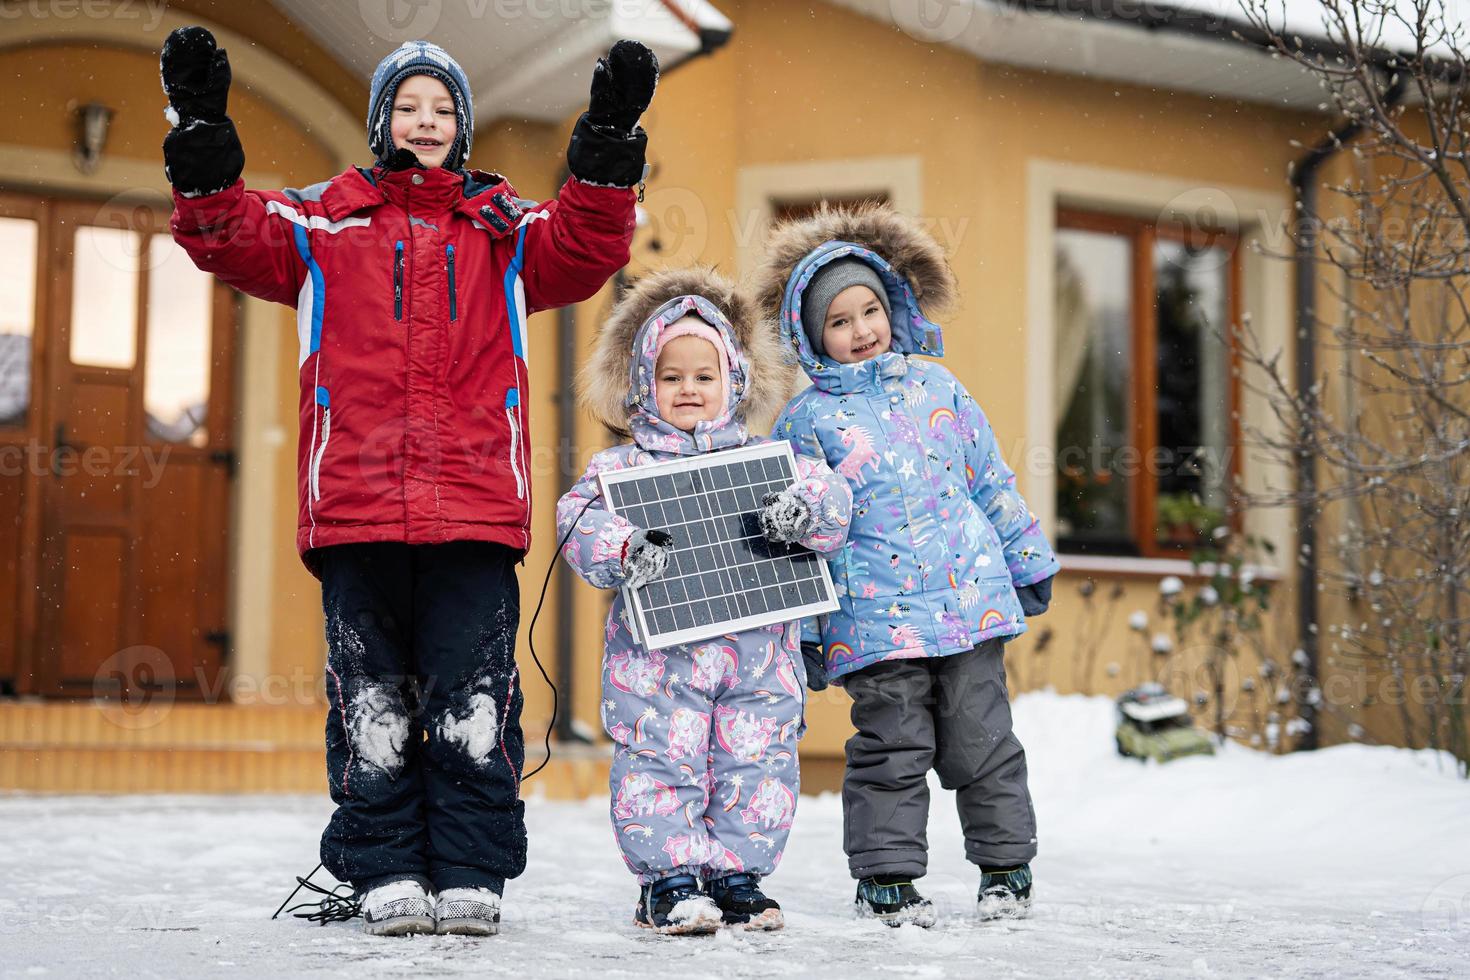 Kids with solar panel against house in winter. Alternative energy concept. photo